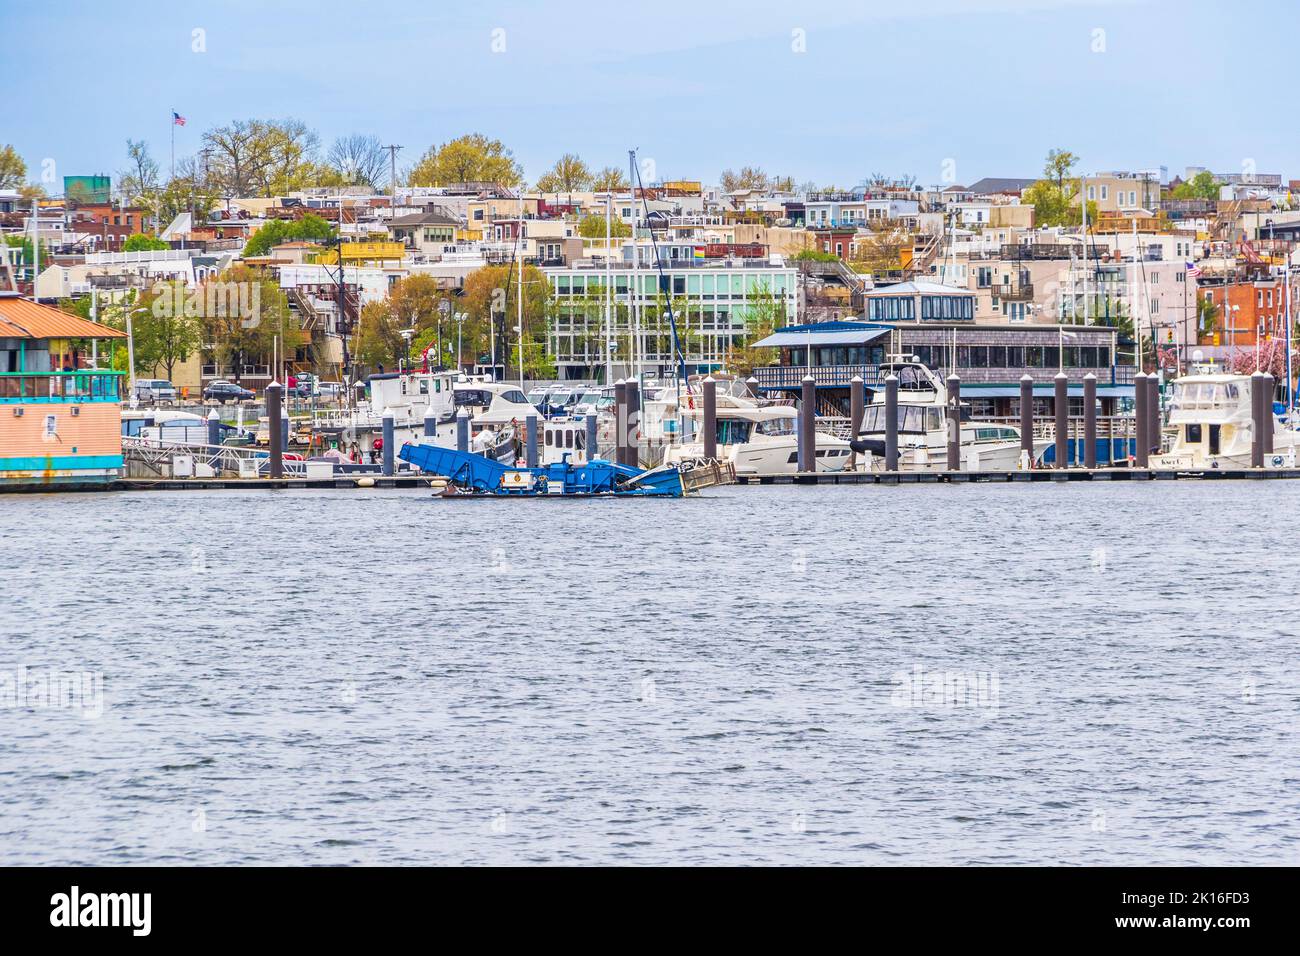 Trash-skimmer boat in Baltimore Inner Harbor, Baltimore, Maryland with background of row houses with view of harbor. Stock Photo